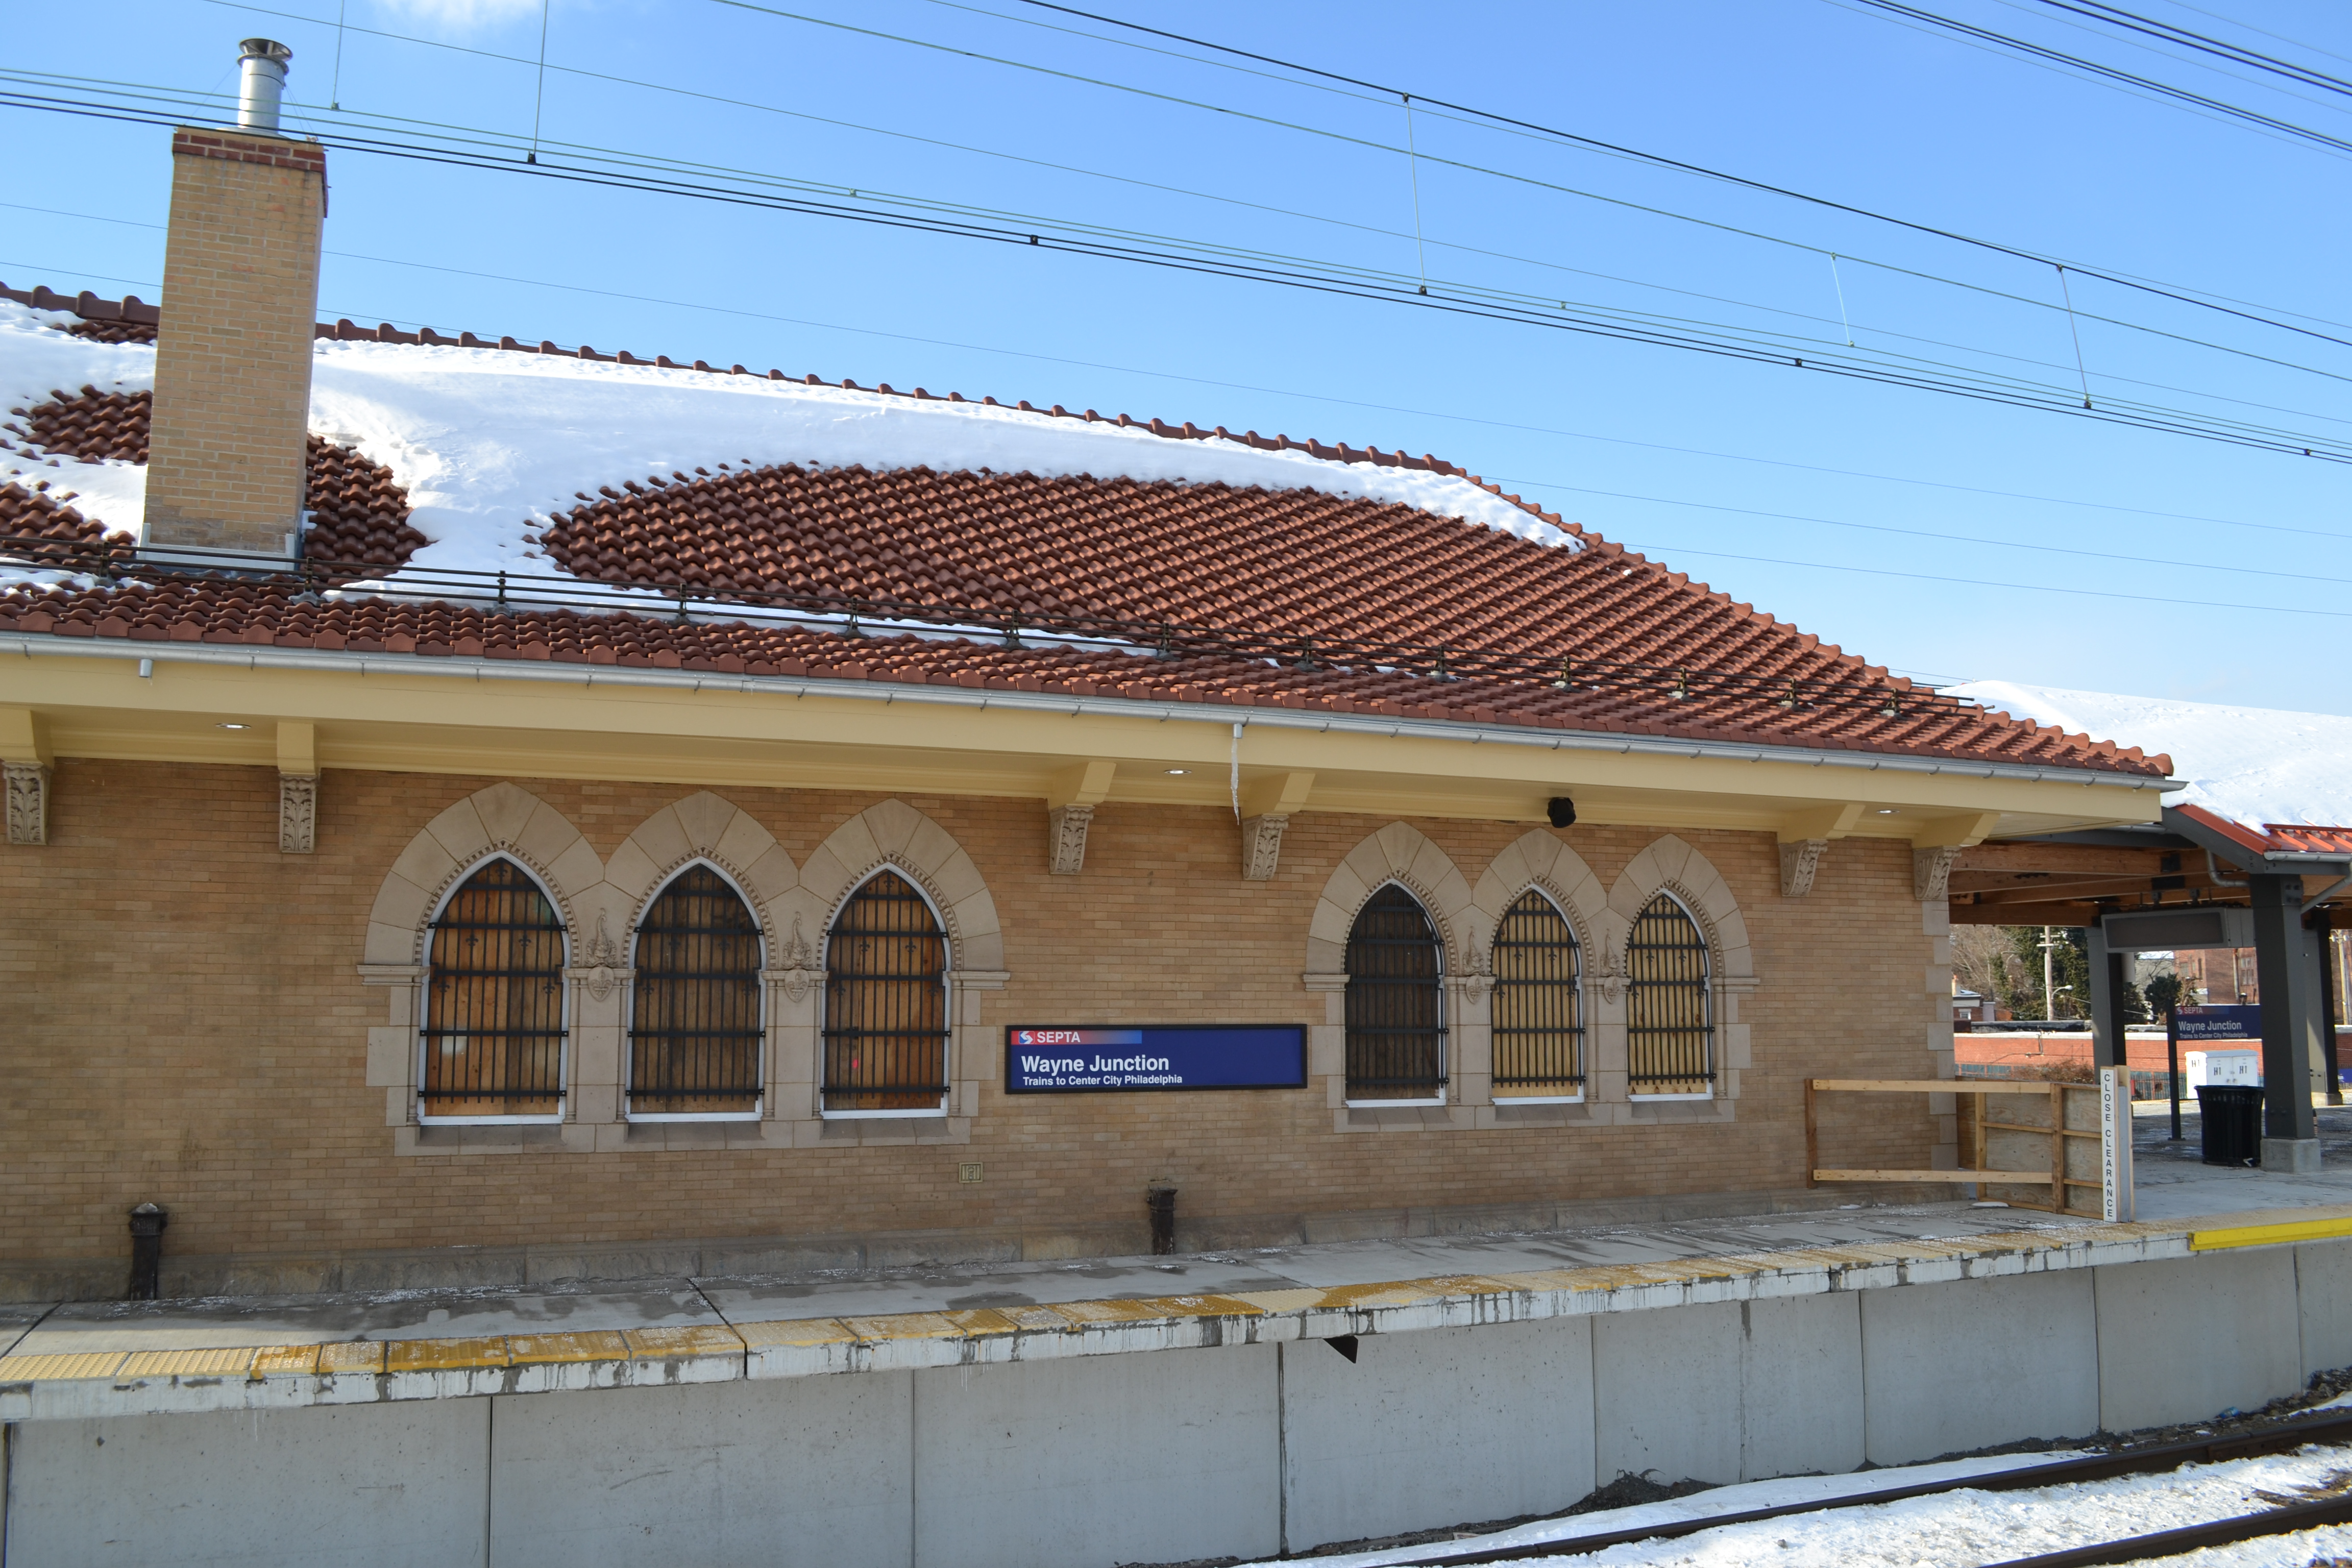 The station building is still under construction, but the roof work is complete